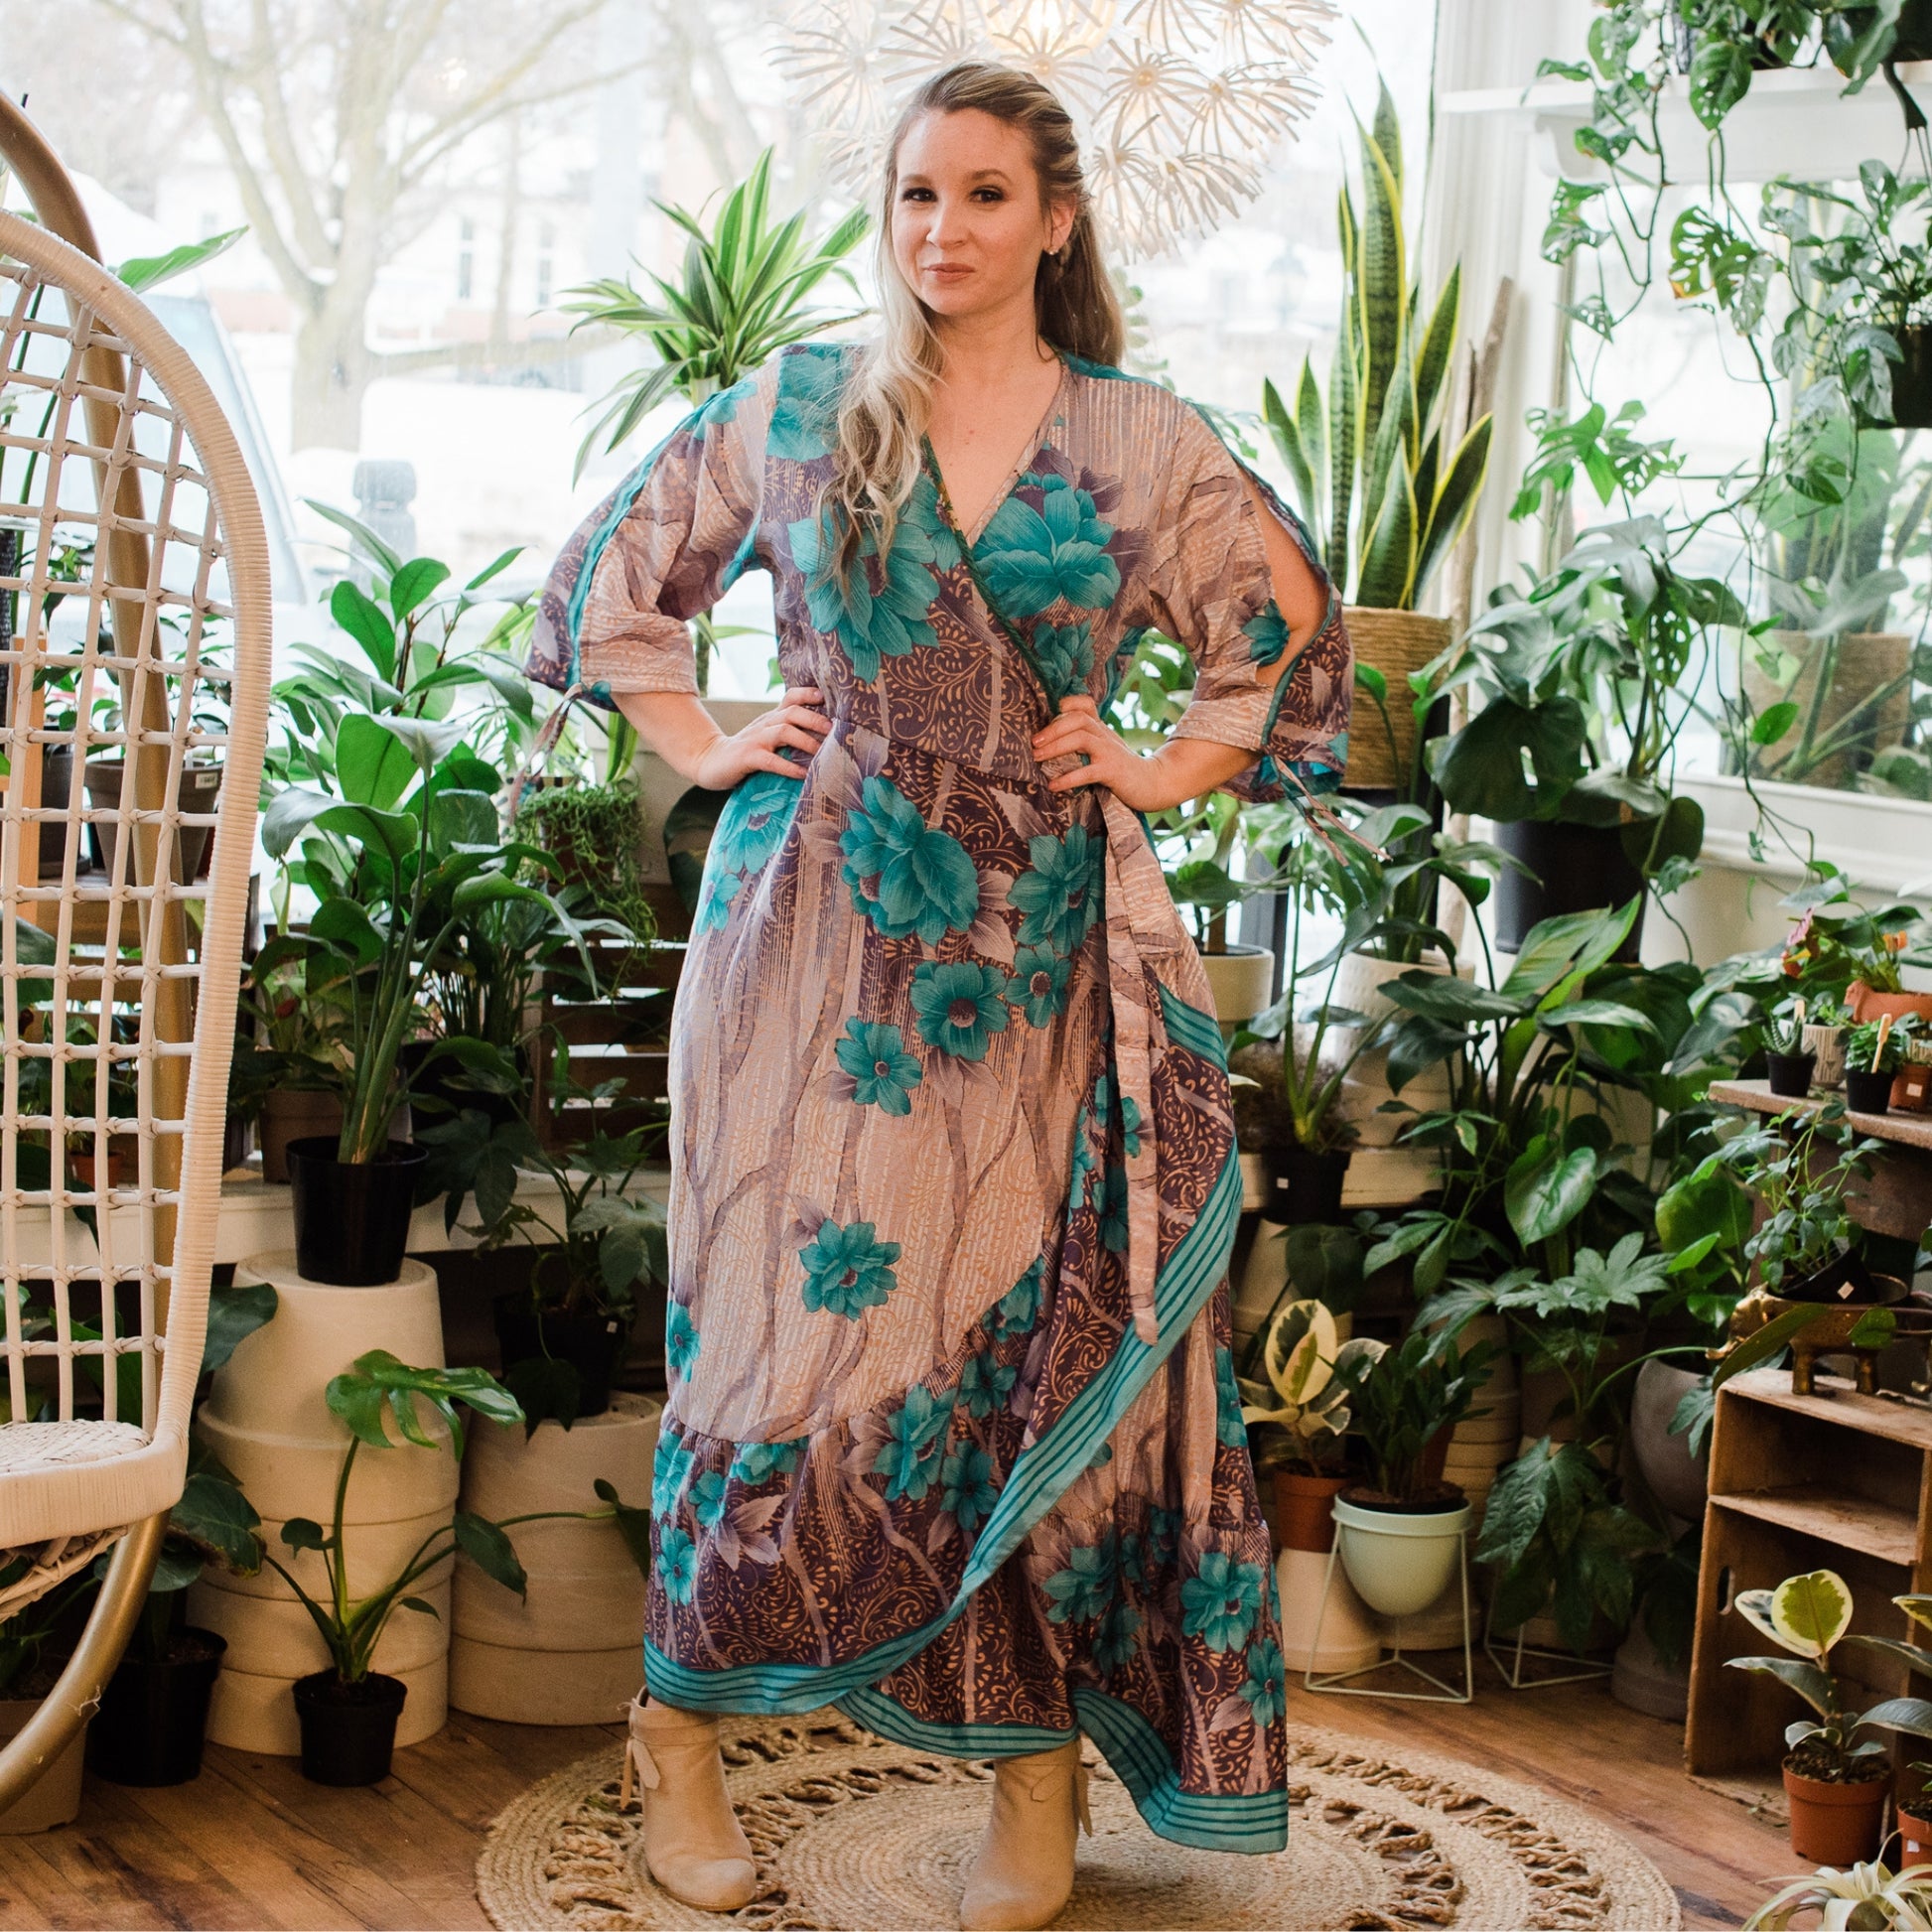 A model standing with her hands on her hips wearing a Tan and Teal Blue Floral Zaria Wrap Dress. The Model is in a Flower Shop.